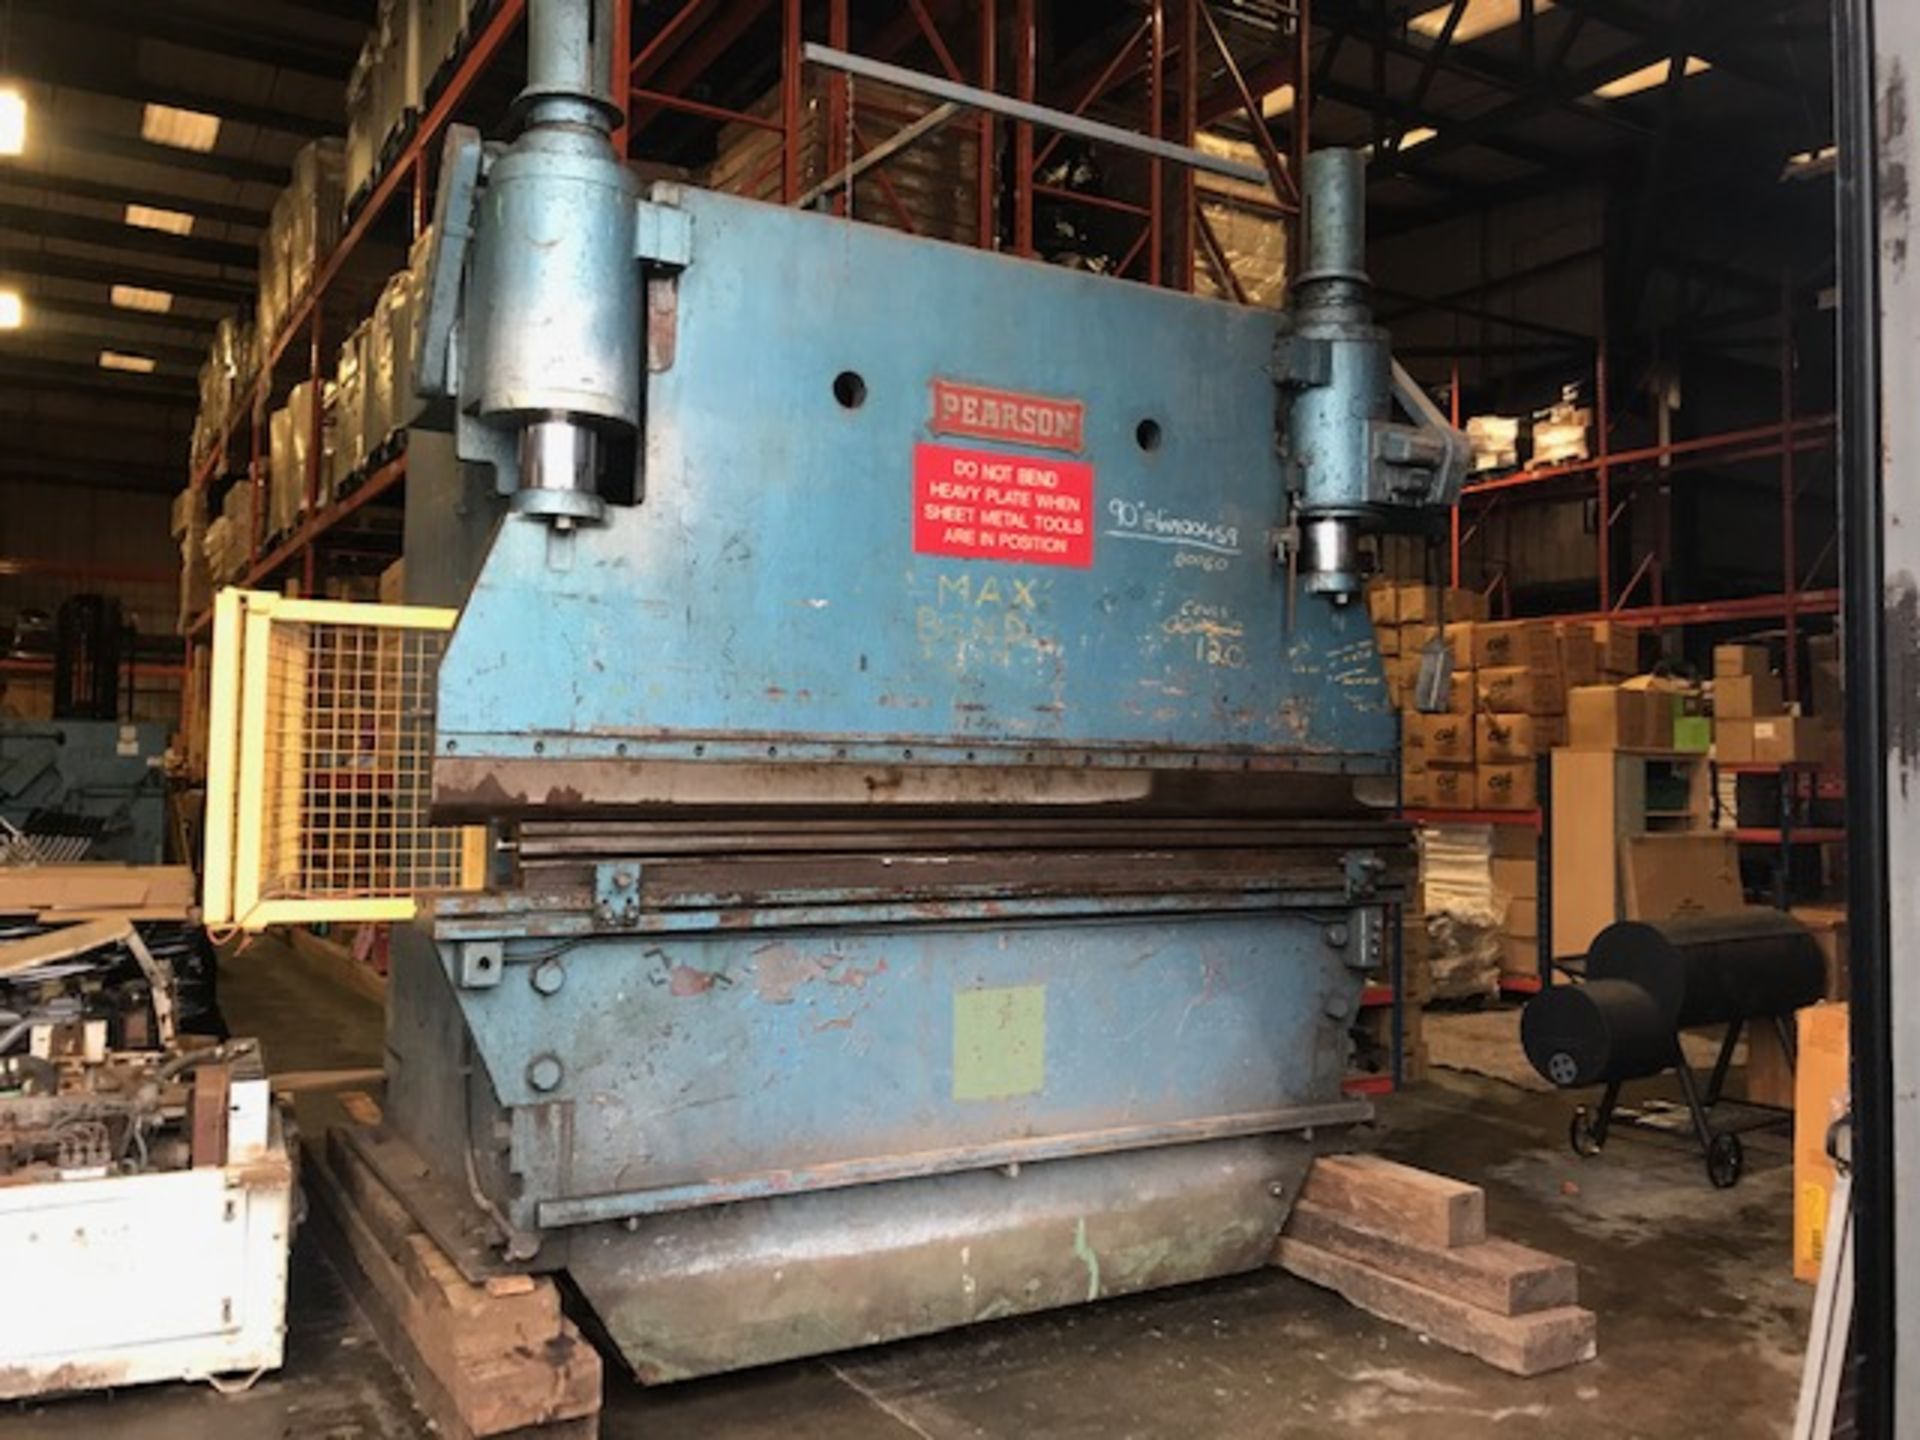 10' PEARSON 280T BRAKE PRESS YEAR UNKNOW PLEASE NOTE THIS ITEM IS STORED AT CHARLES TAYLOR, 26